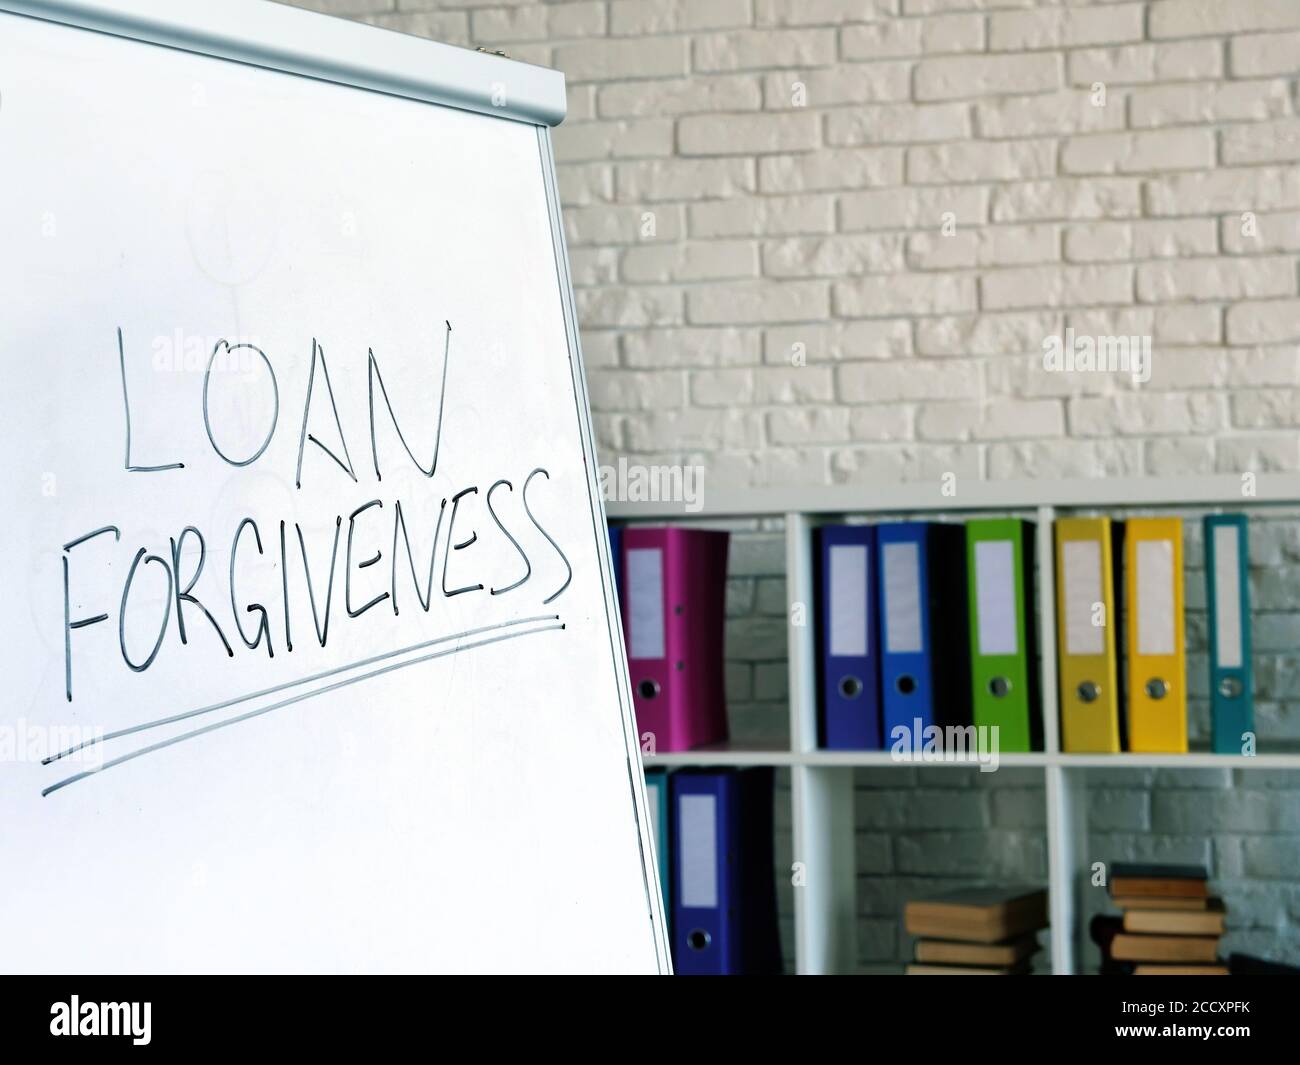 Loan forgiveness inscription on the white board in office. Stock Photo